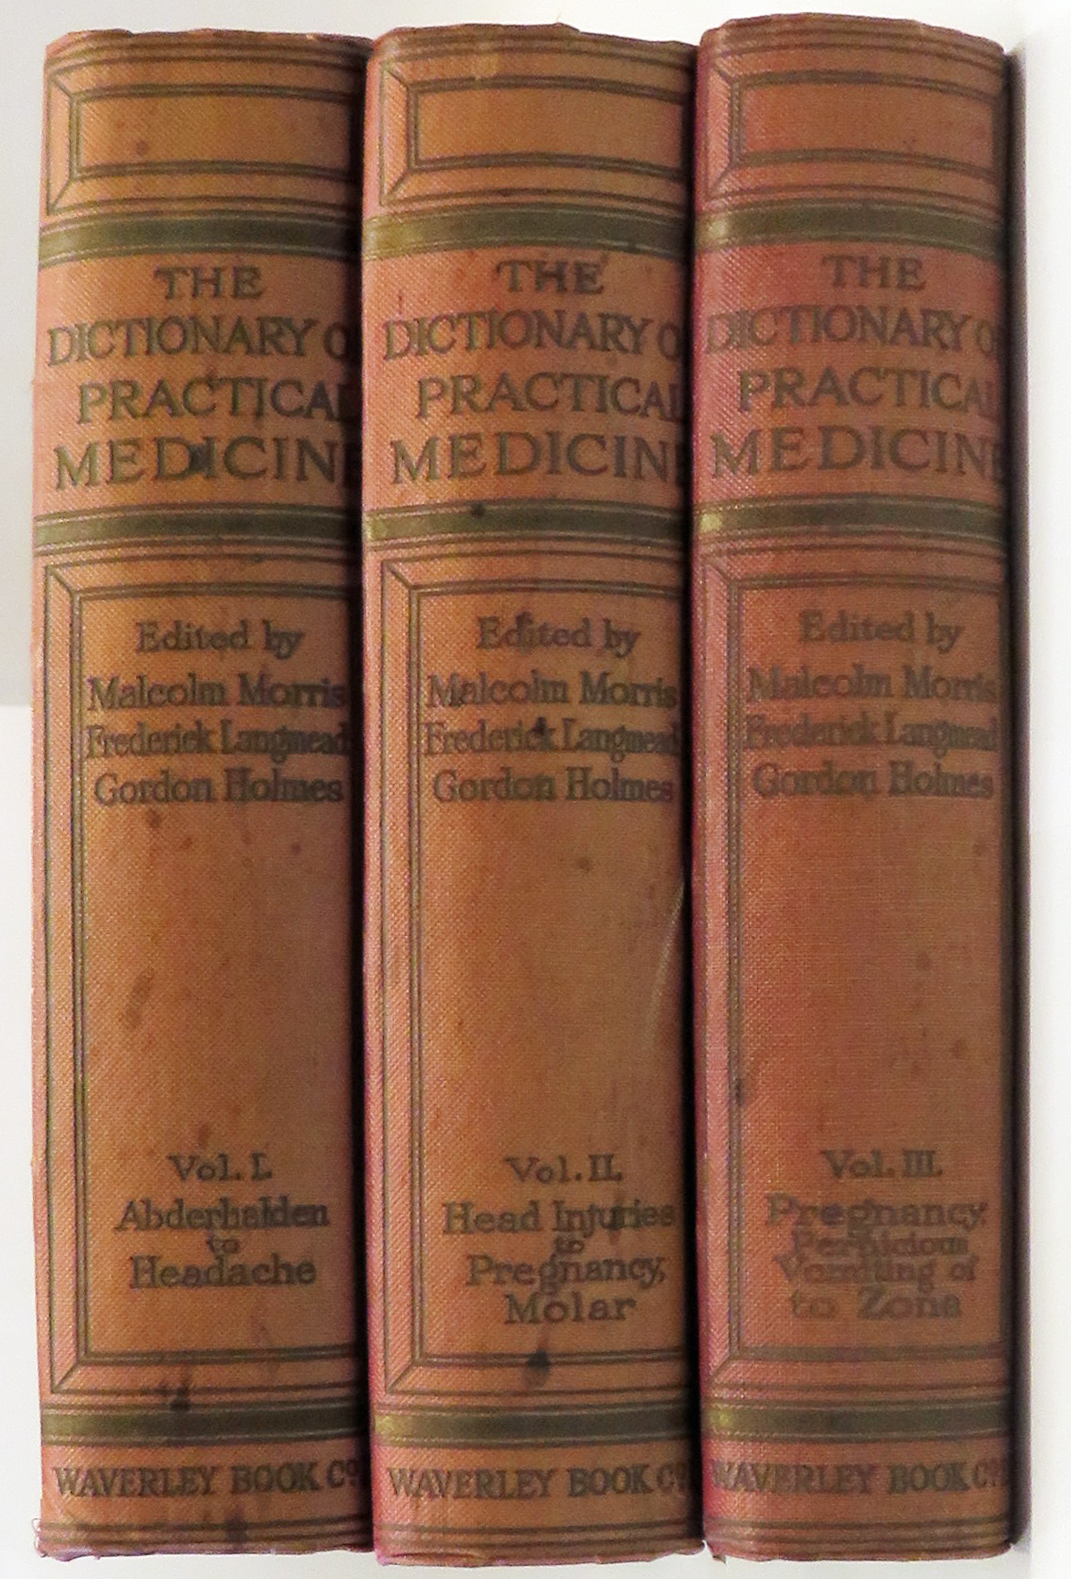 The Dictionary of Practical Medicine in three volumes